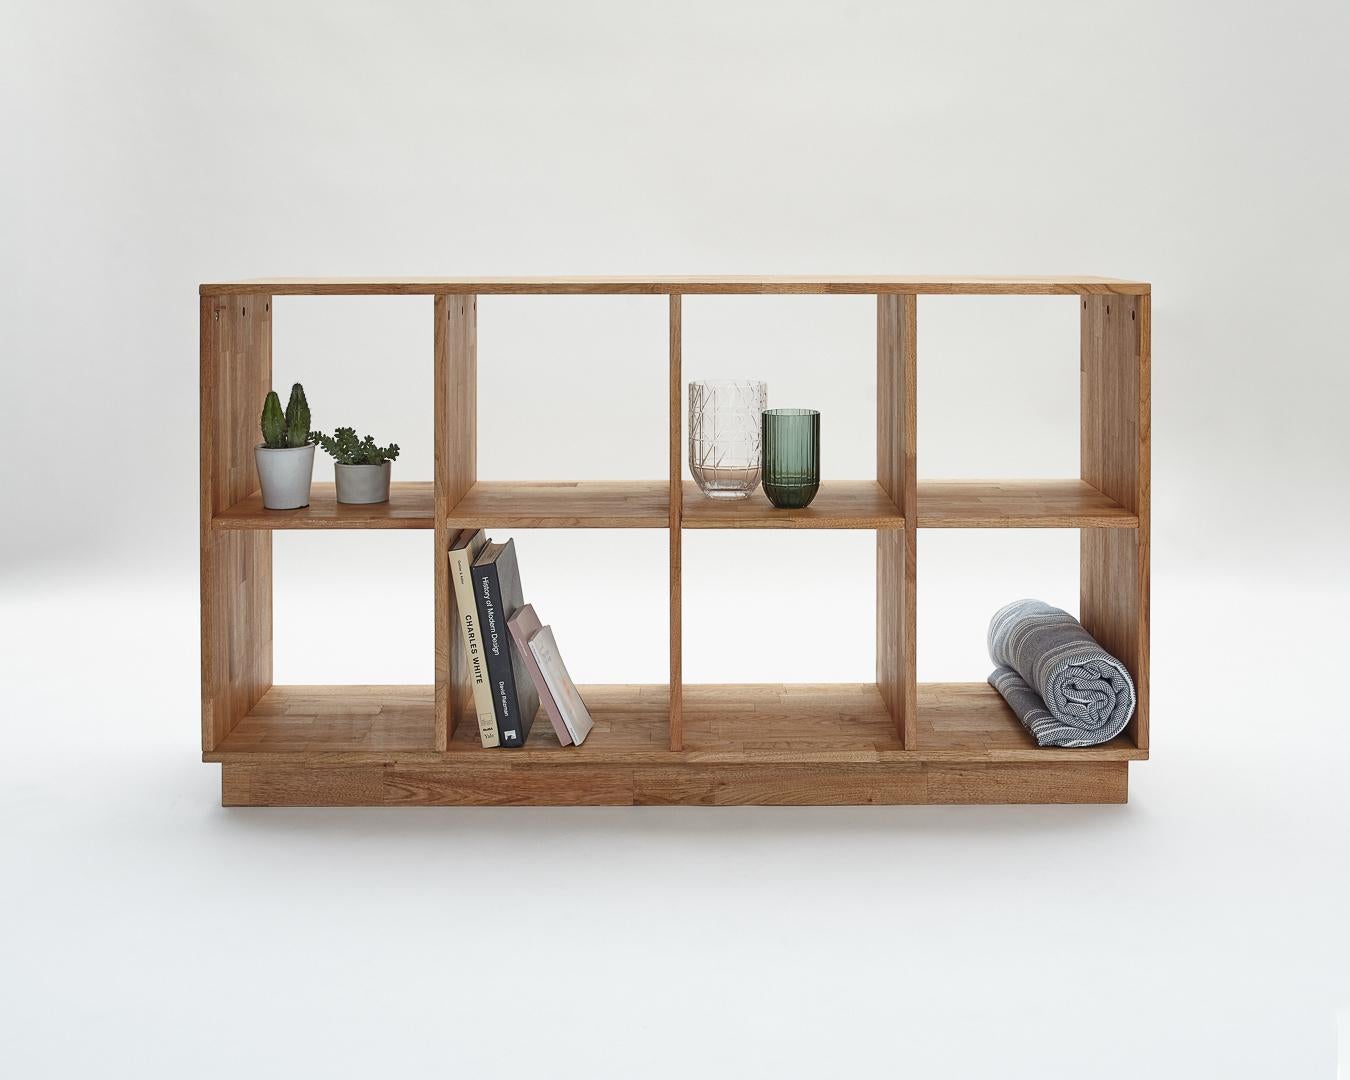 Perfect for smaller spaces or pair it for additional storage with the LAX Series wall-mounted Desk, the MASH LAX Series 4 x 2 bookcase has got you covered. This bookcase is sturdy and built to last, made from solid English walnut. With 13.5